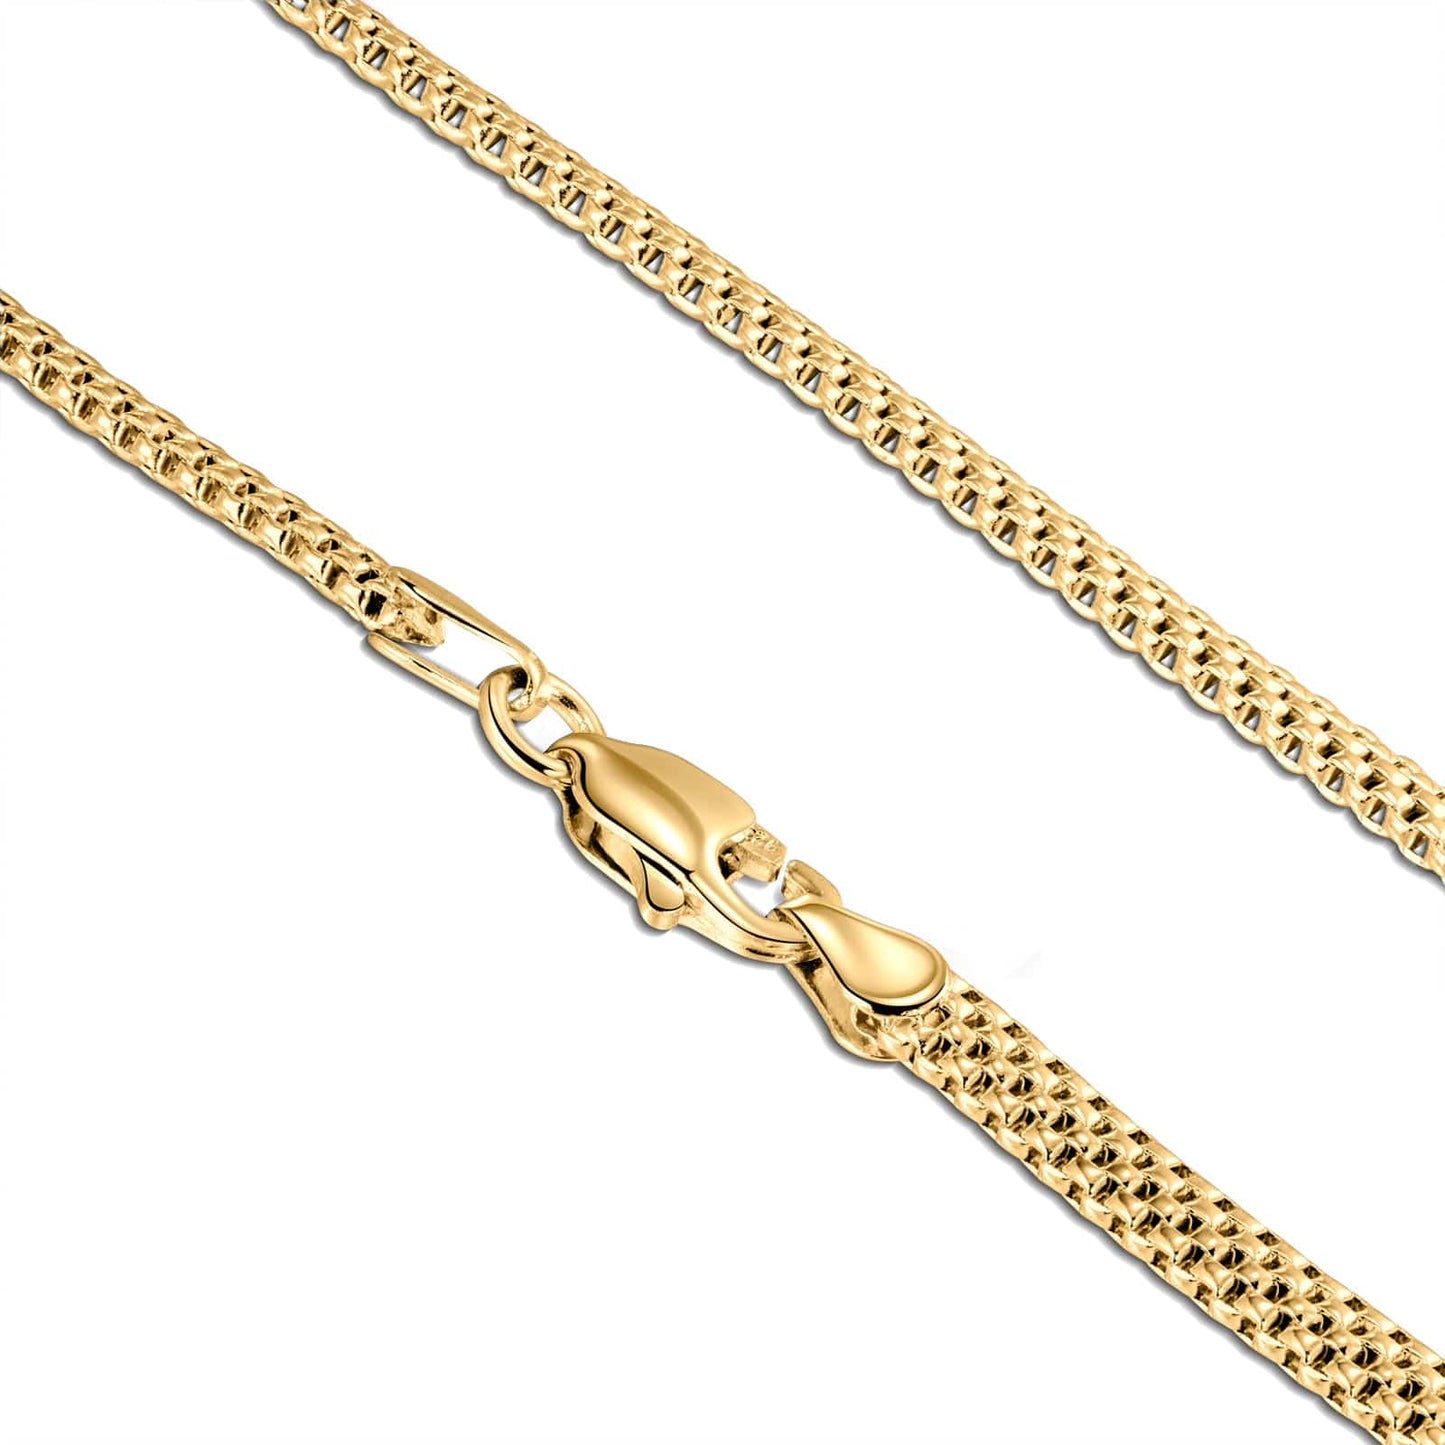 Sterling Silver Simple Chain Necklace In 14K Gold Plated